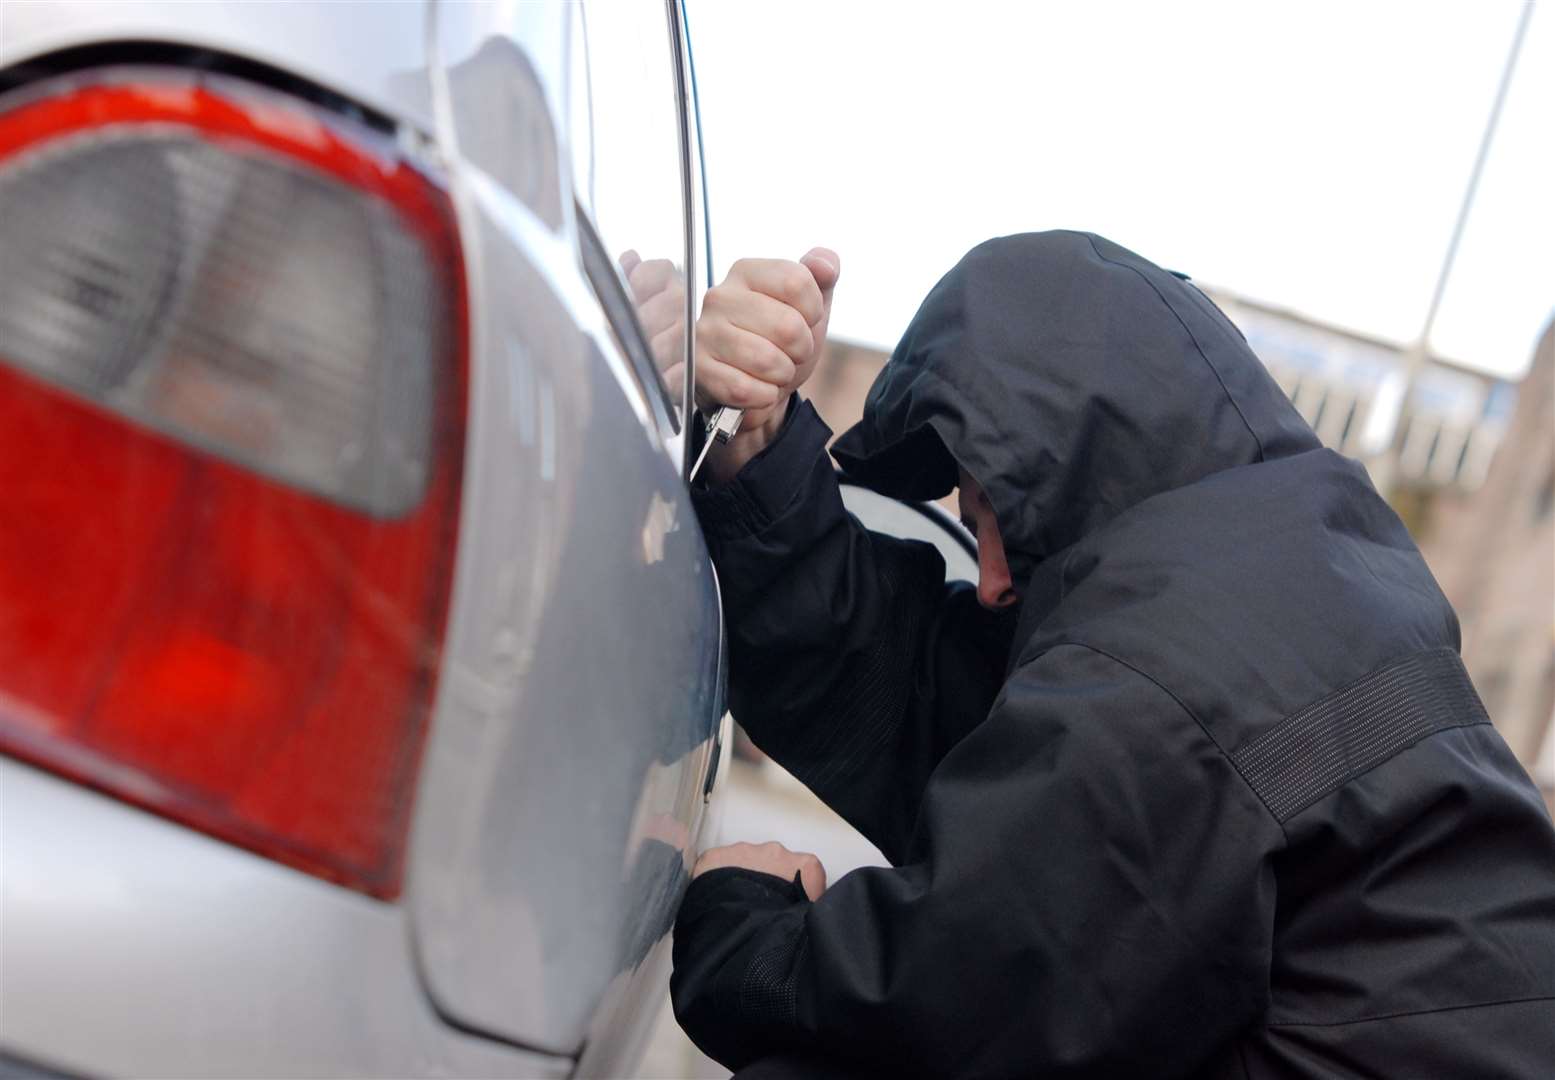 Car theft is rare in Inverness according to insurers.